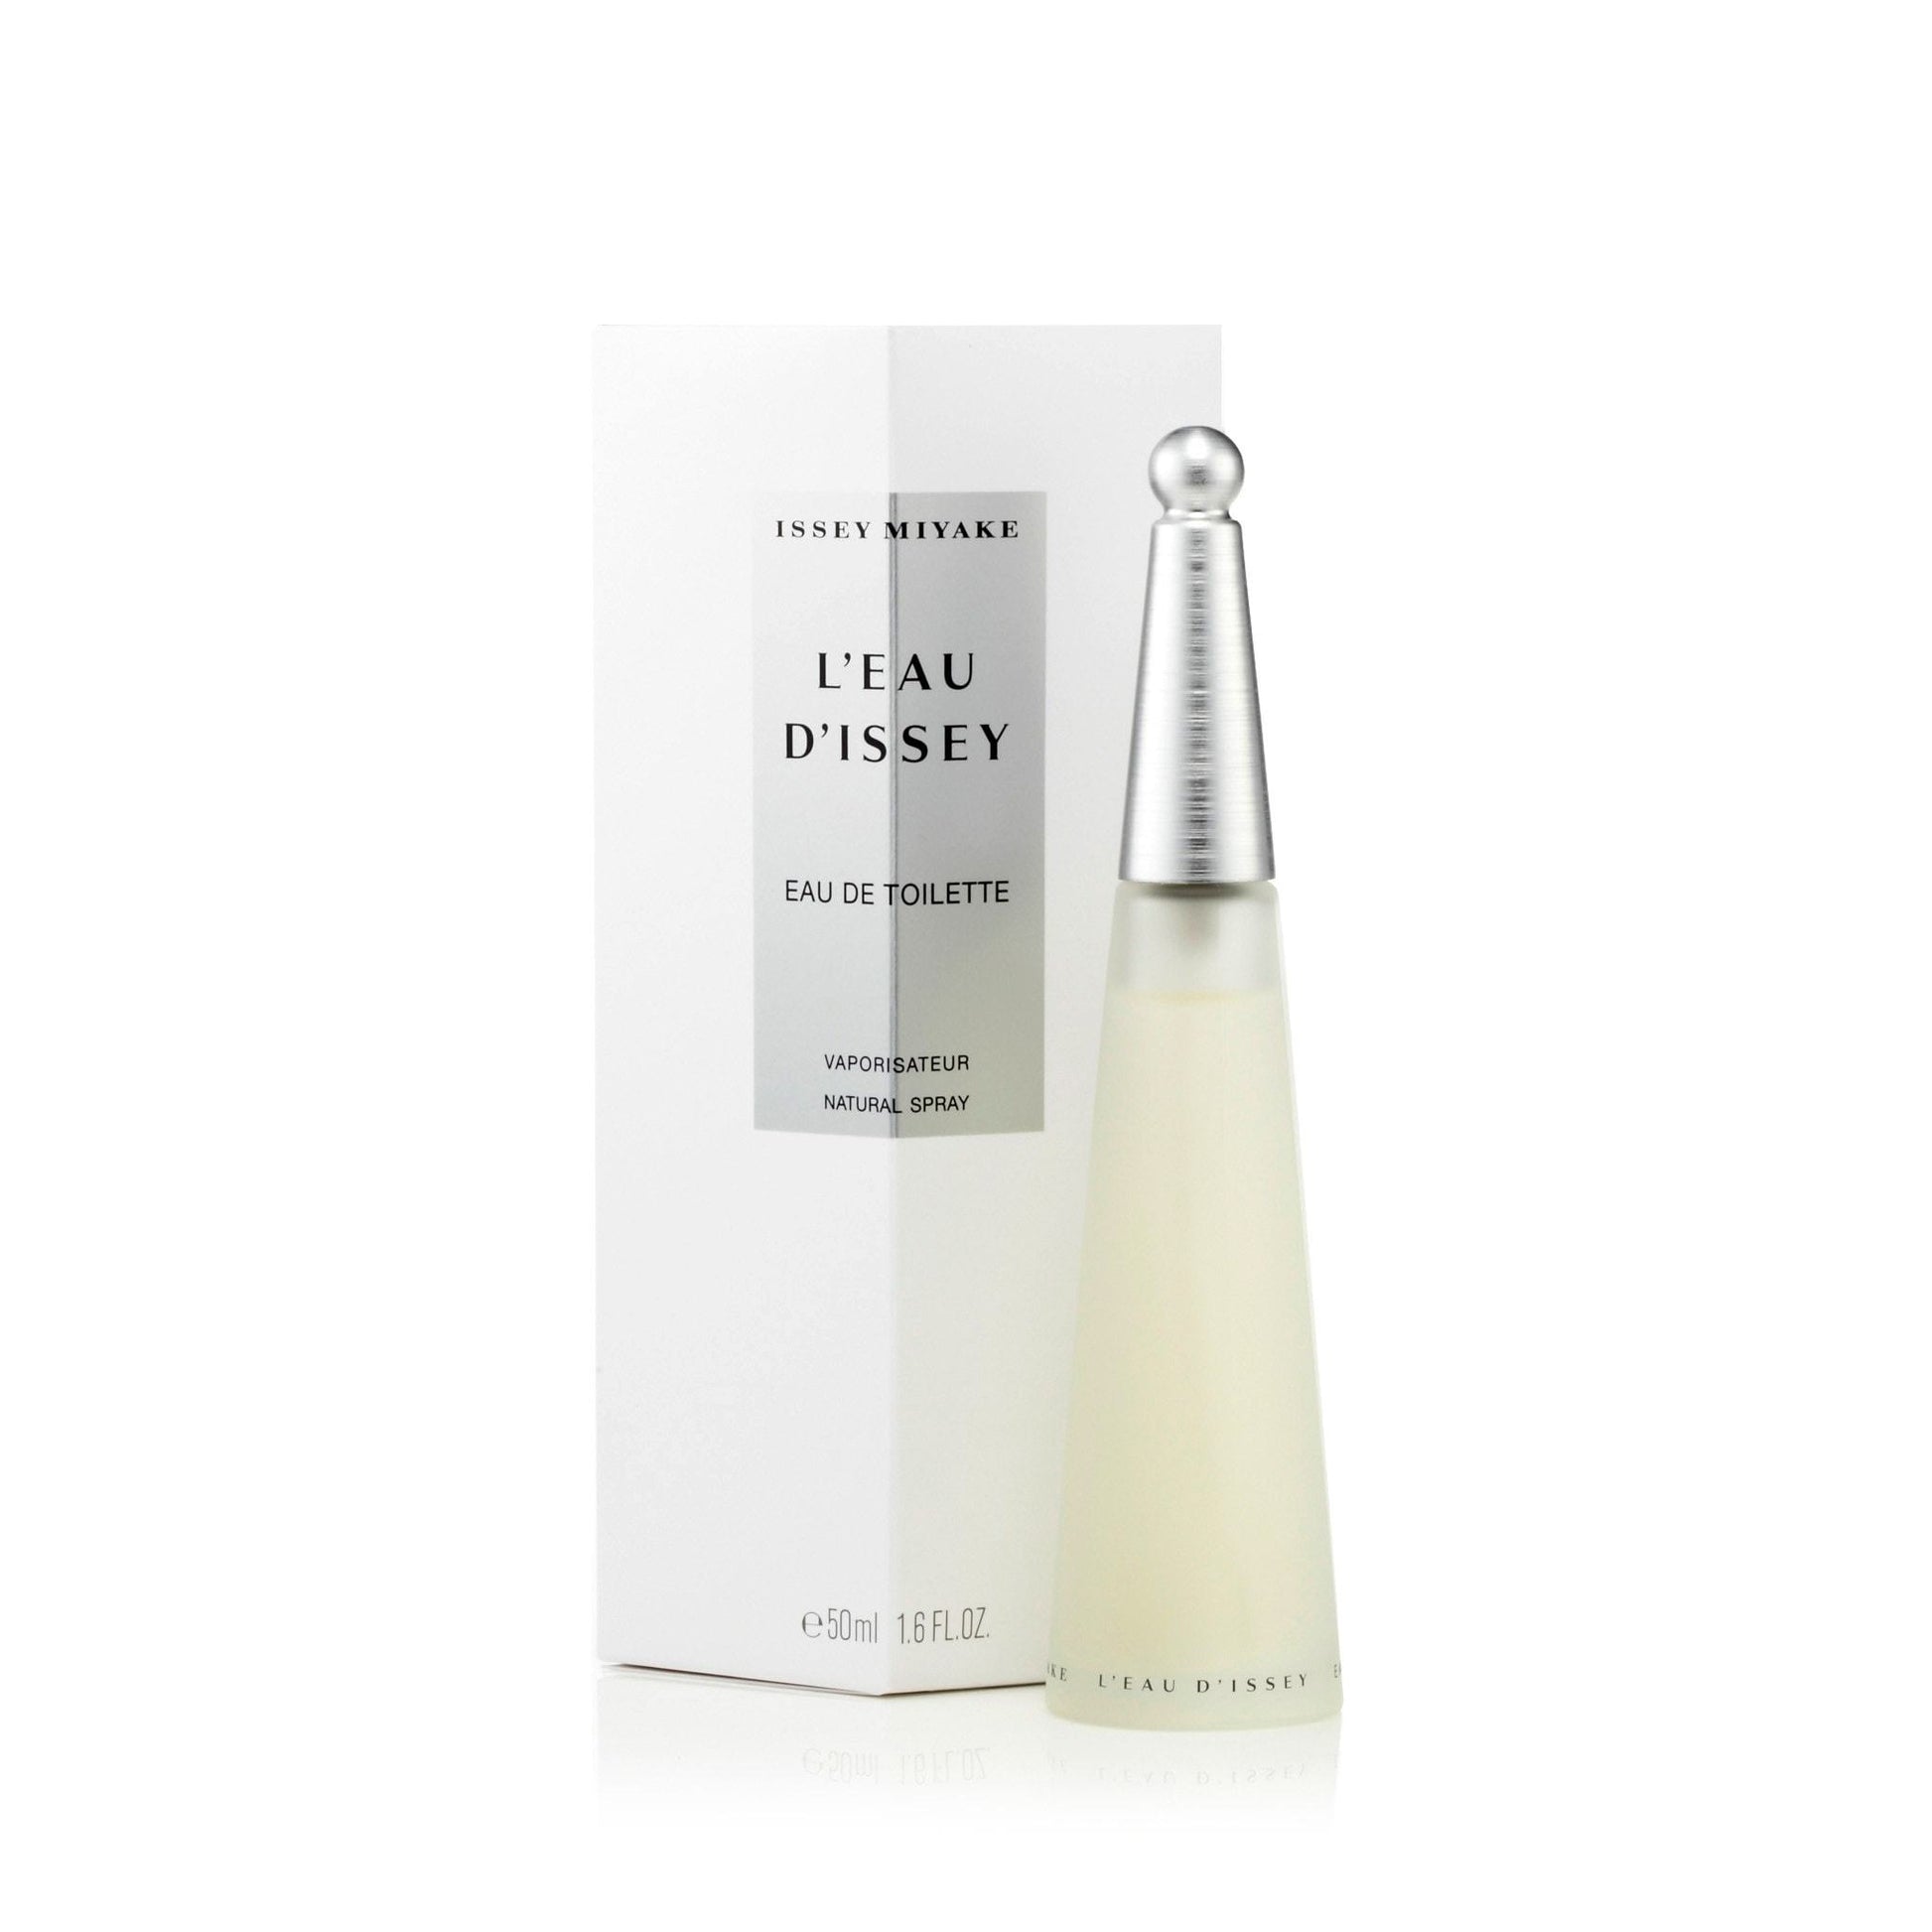 L'Eau Dissey Eau de Toilette Spray for Women by Issey Miyake, Product image 7